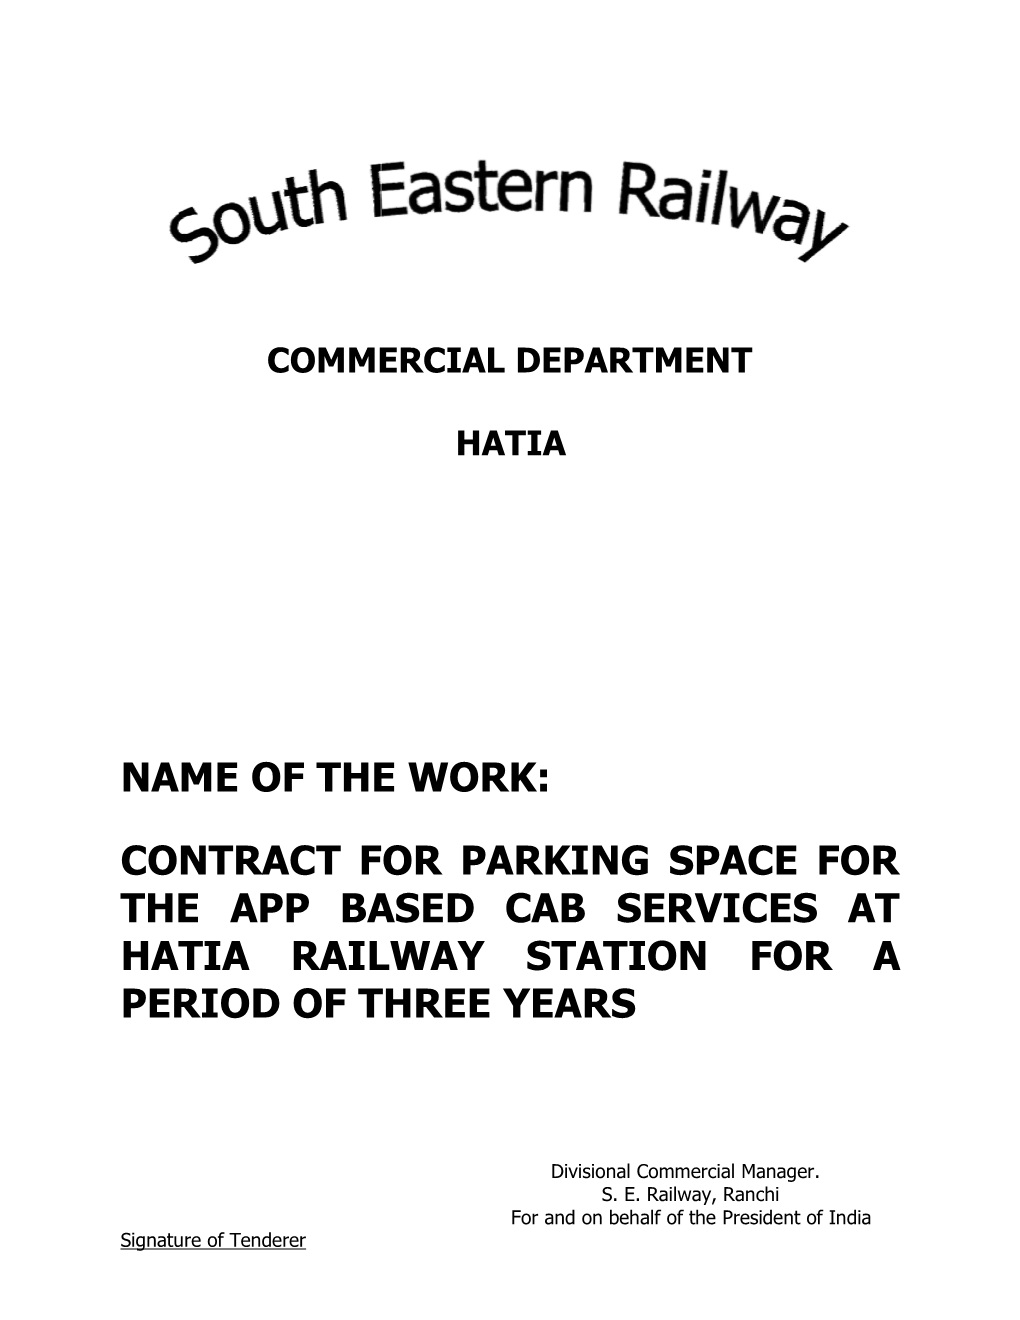 Contract for Parki the App Based Cab Hatia Railway